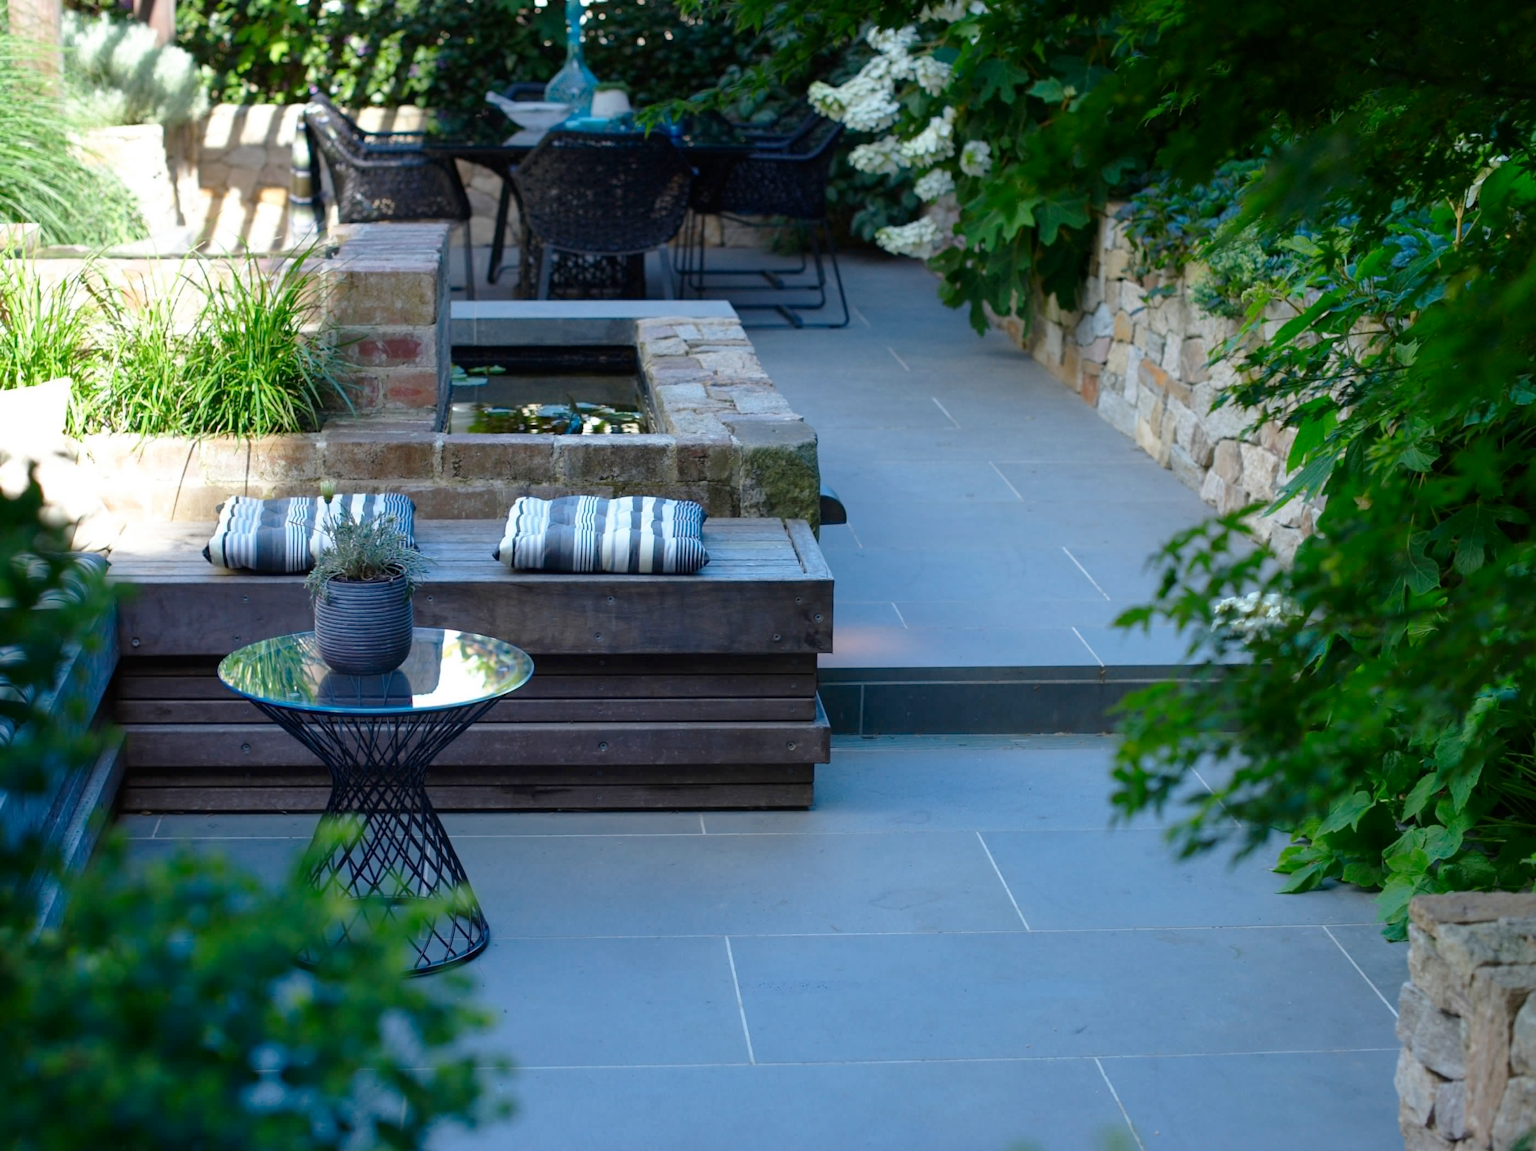 Courtyard garden with large format bluestone pavers and Alpine dry stone retaining walls with water feature